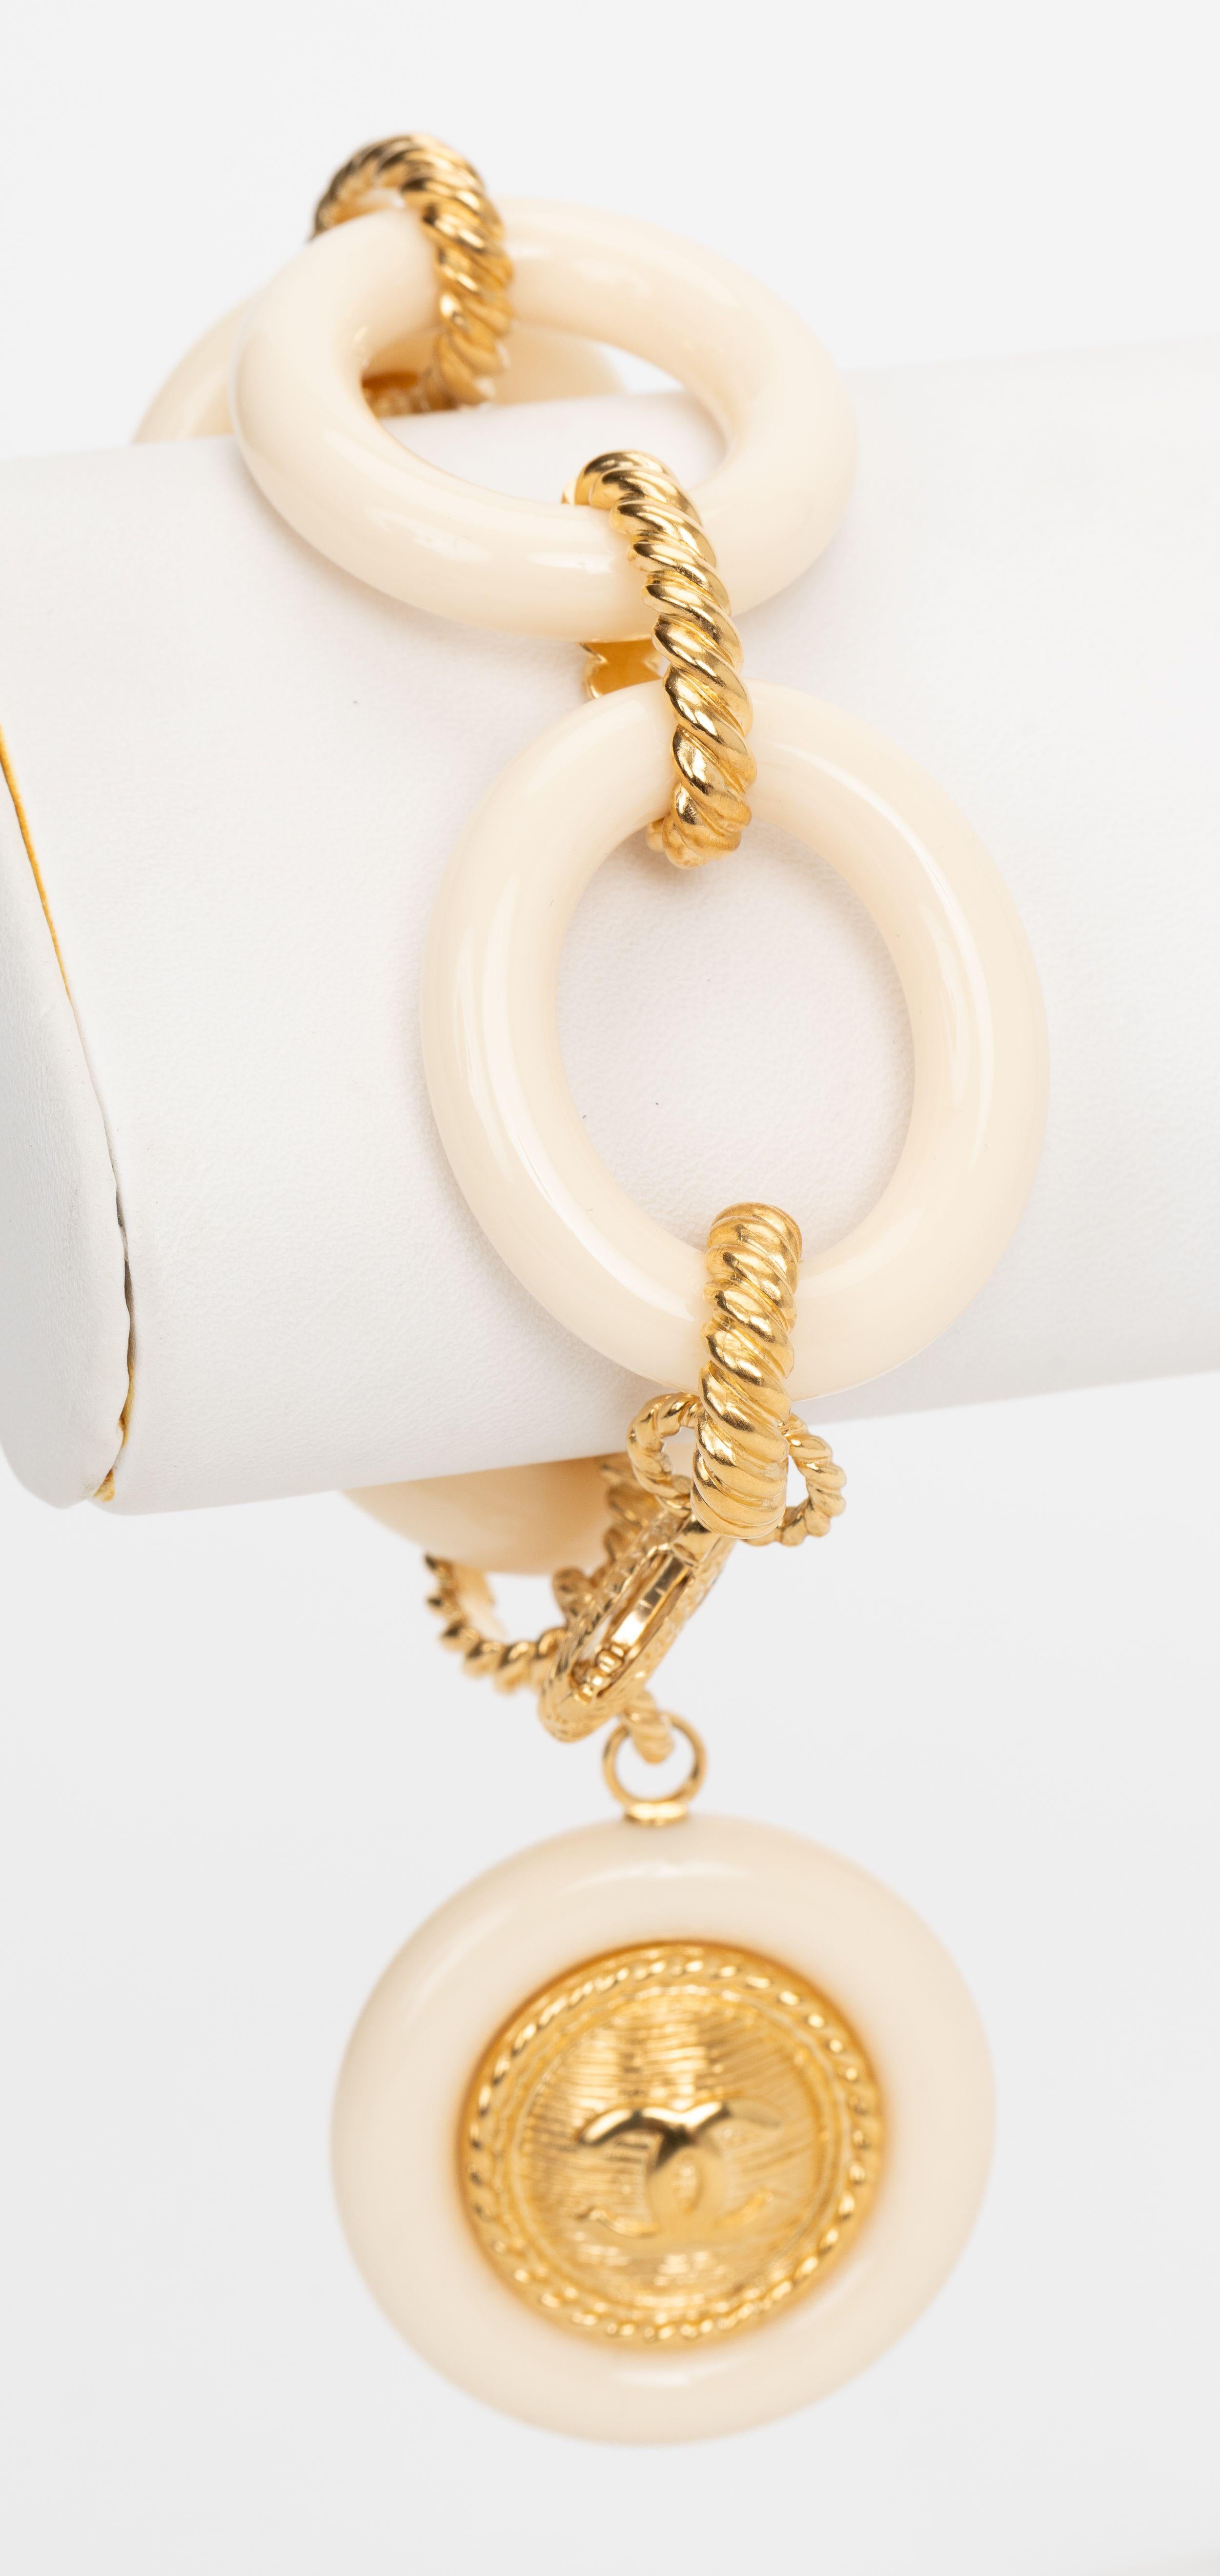 Chanel New Cream Lucite Coin Bracelet In New Condition For Sale In West Hollywood, CA